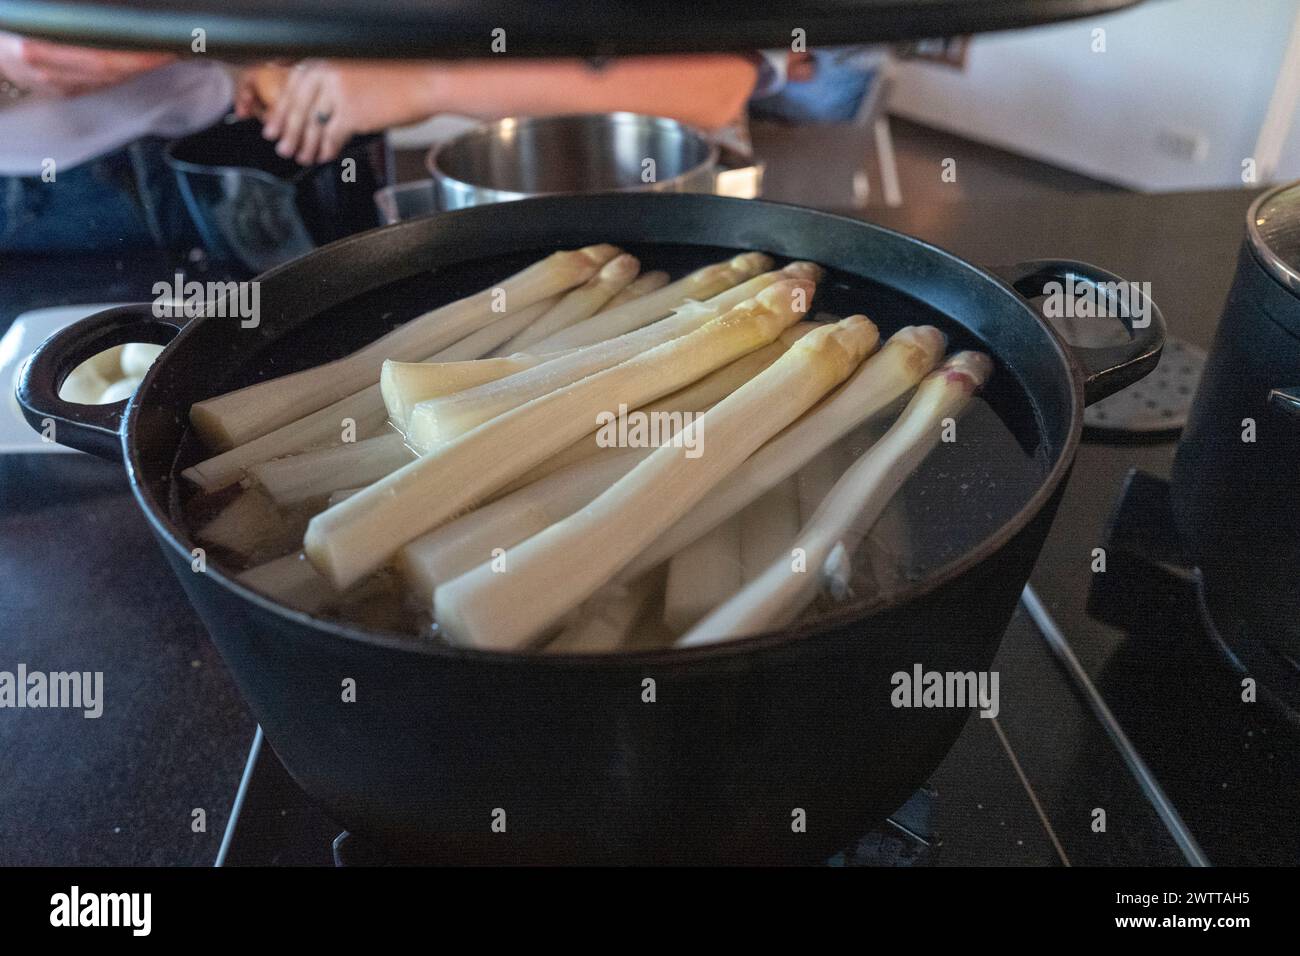 A pot full of fresh asparagus on a stove ready for cooking Stock Photo